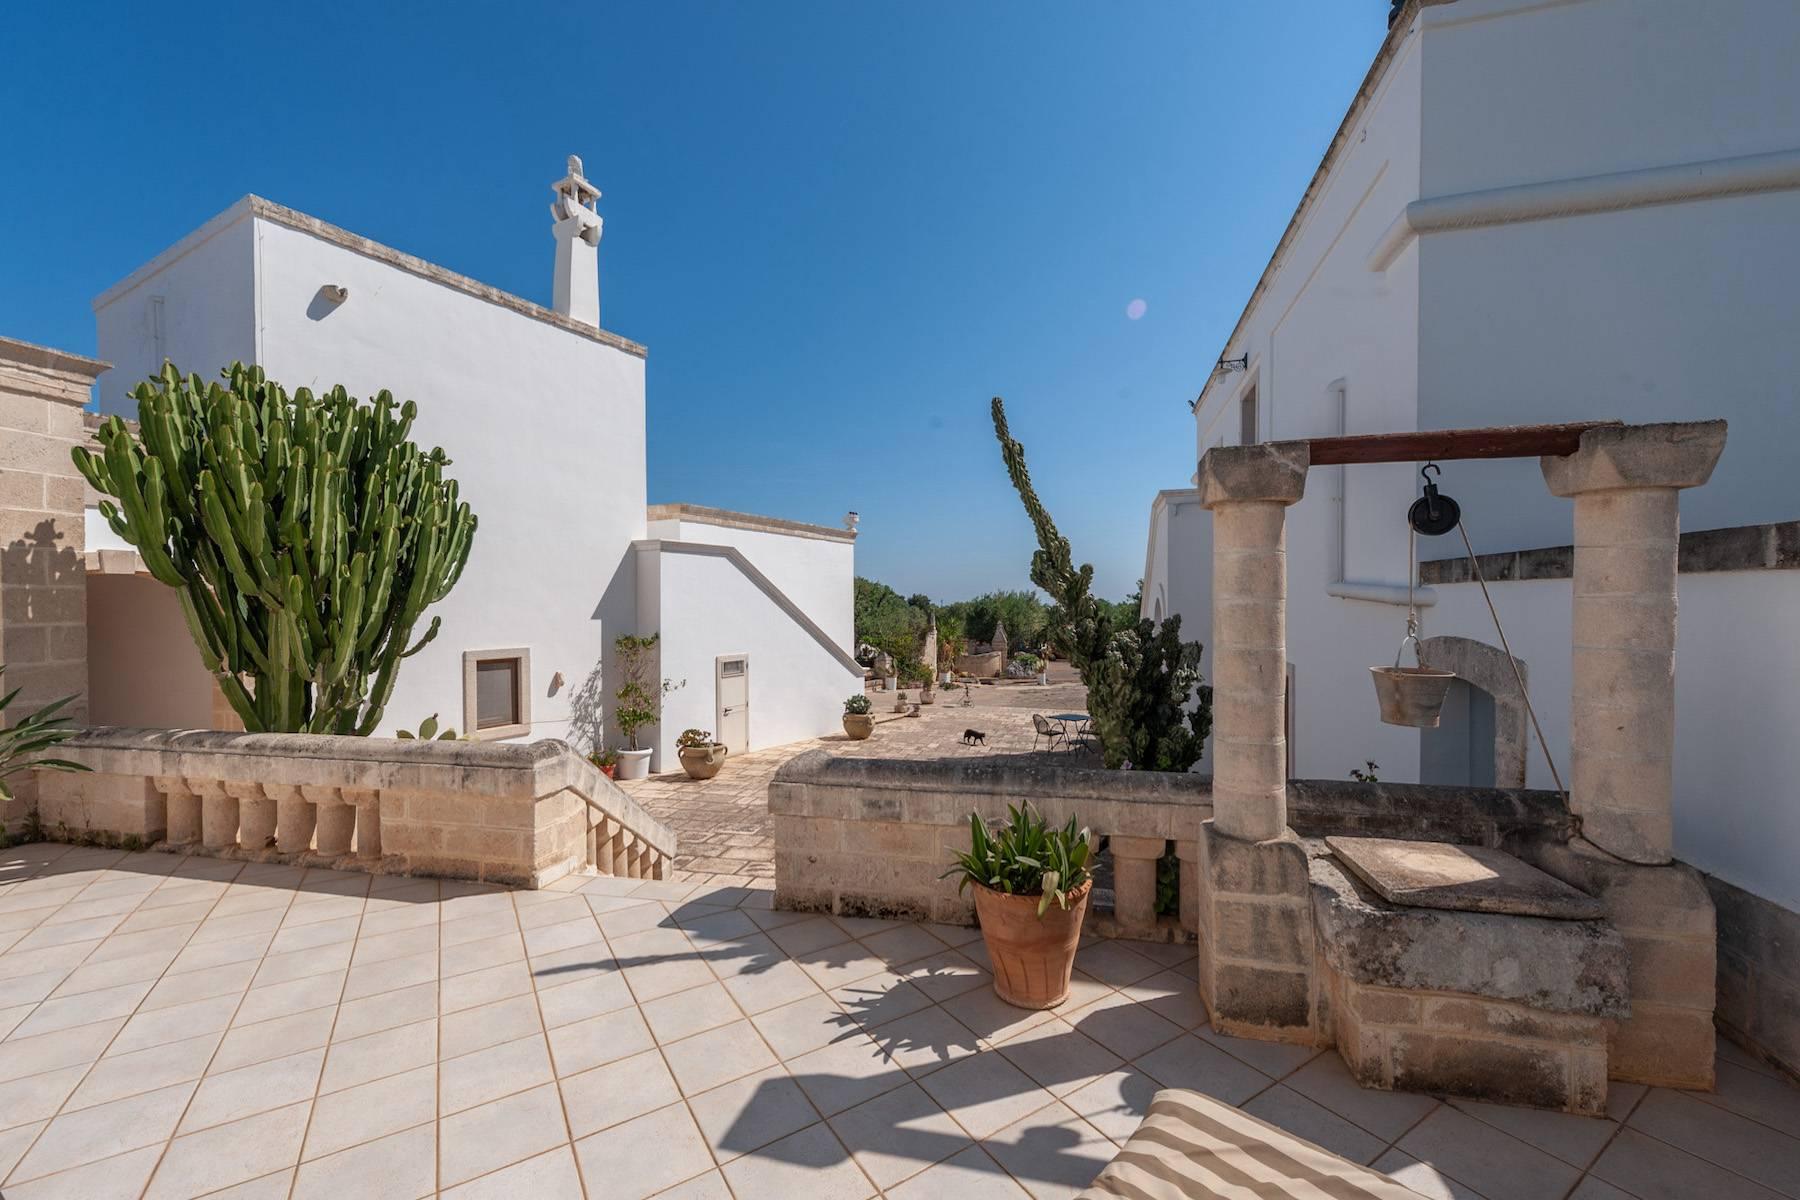 Charming 18th century Masseria surrounded by centuries-old olive trees - 5